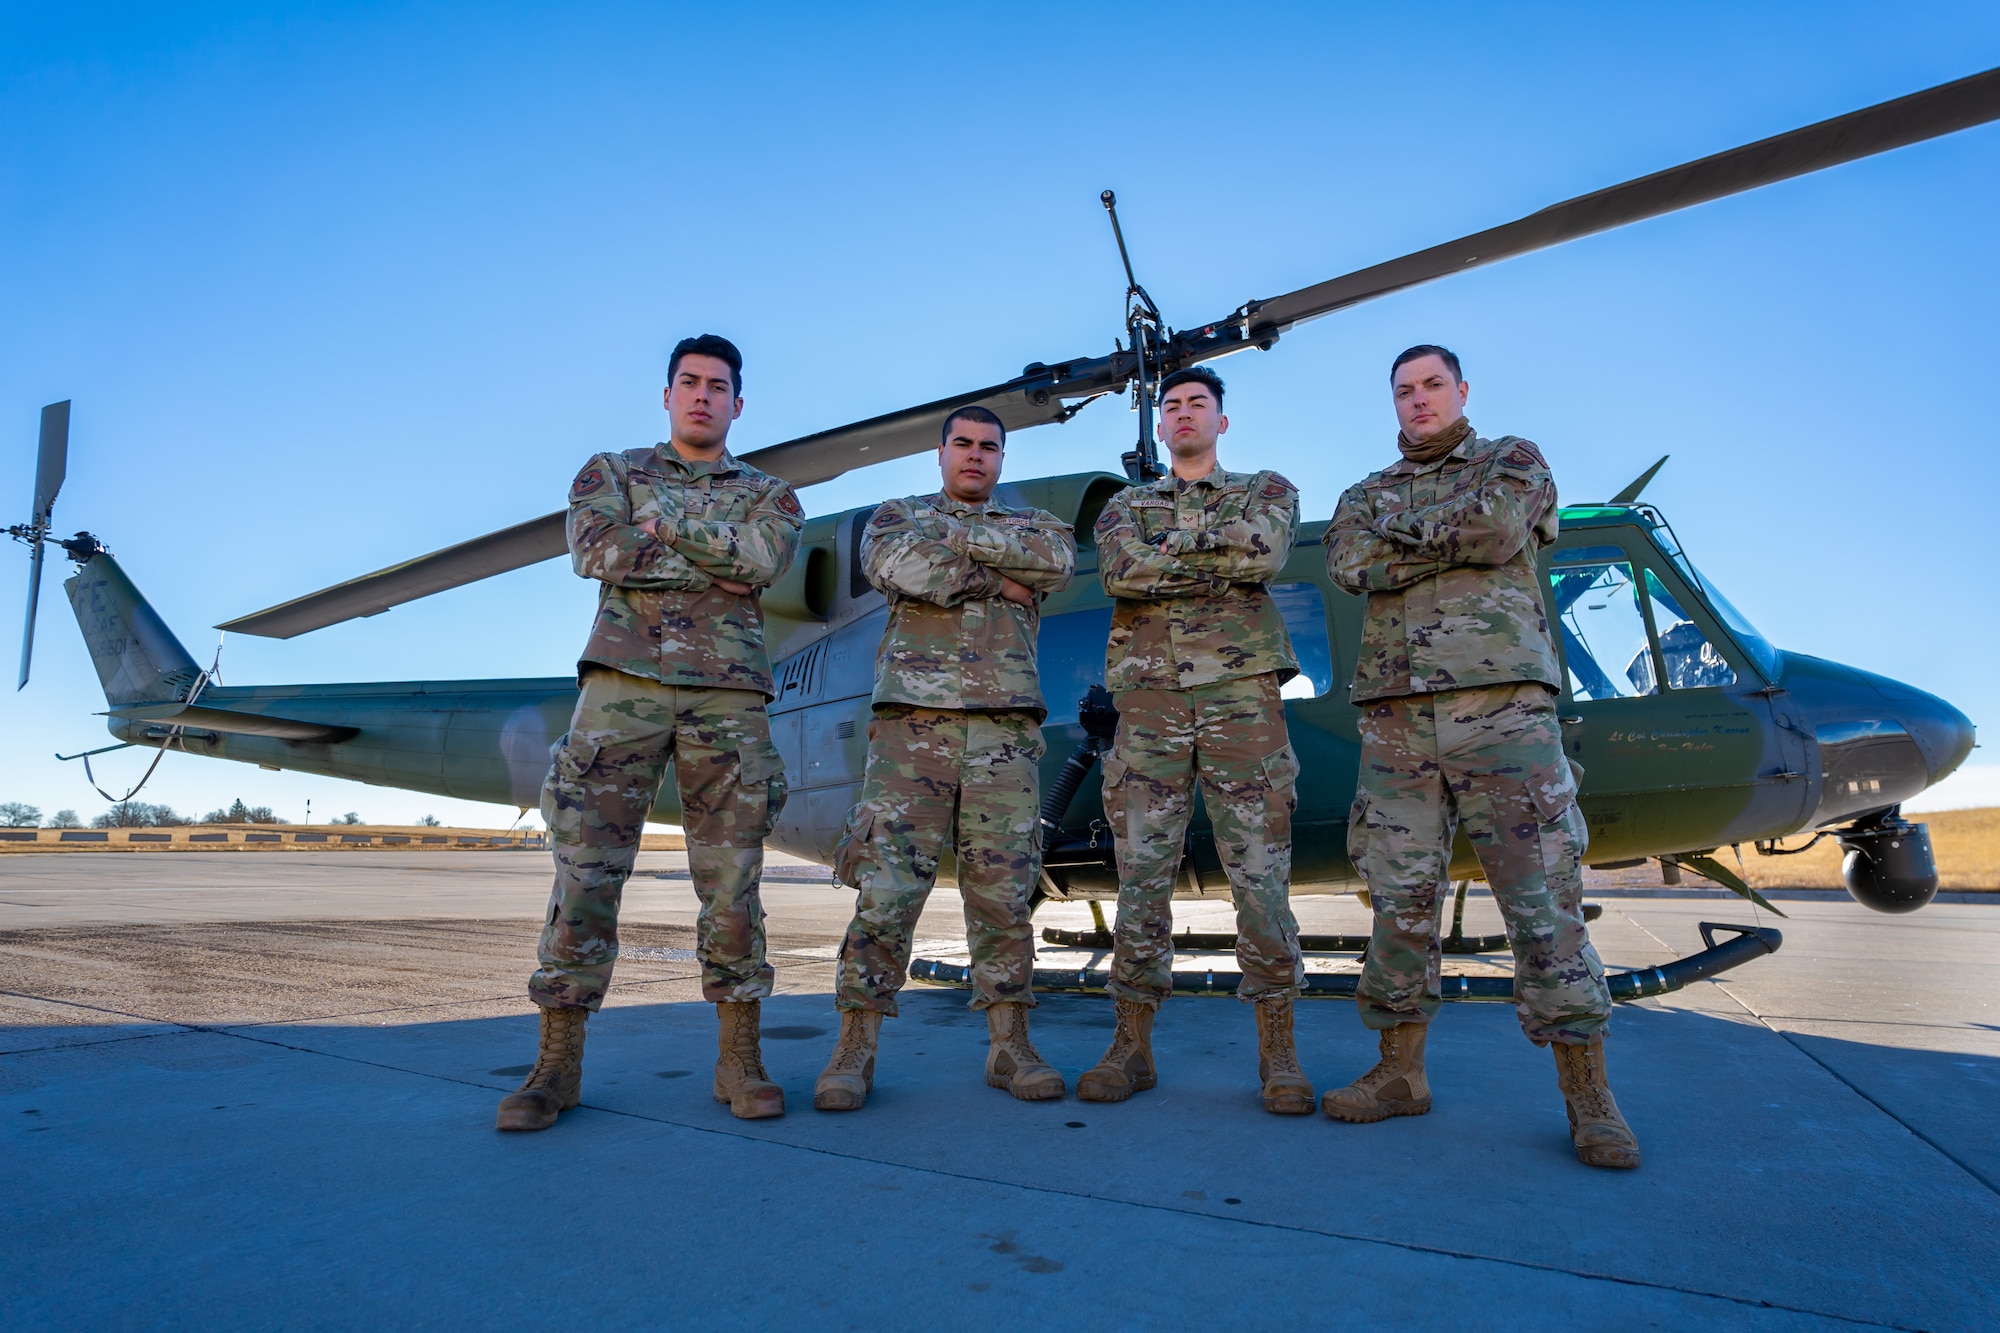 Four Airmen pose for a photo in front of a UH-1N Huey helicopter at F.E. Warren Air Force Base, Wyoming.